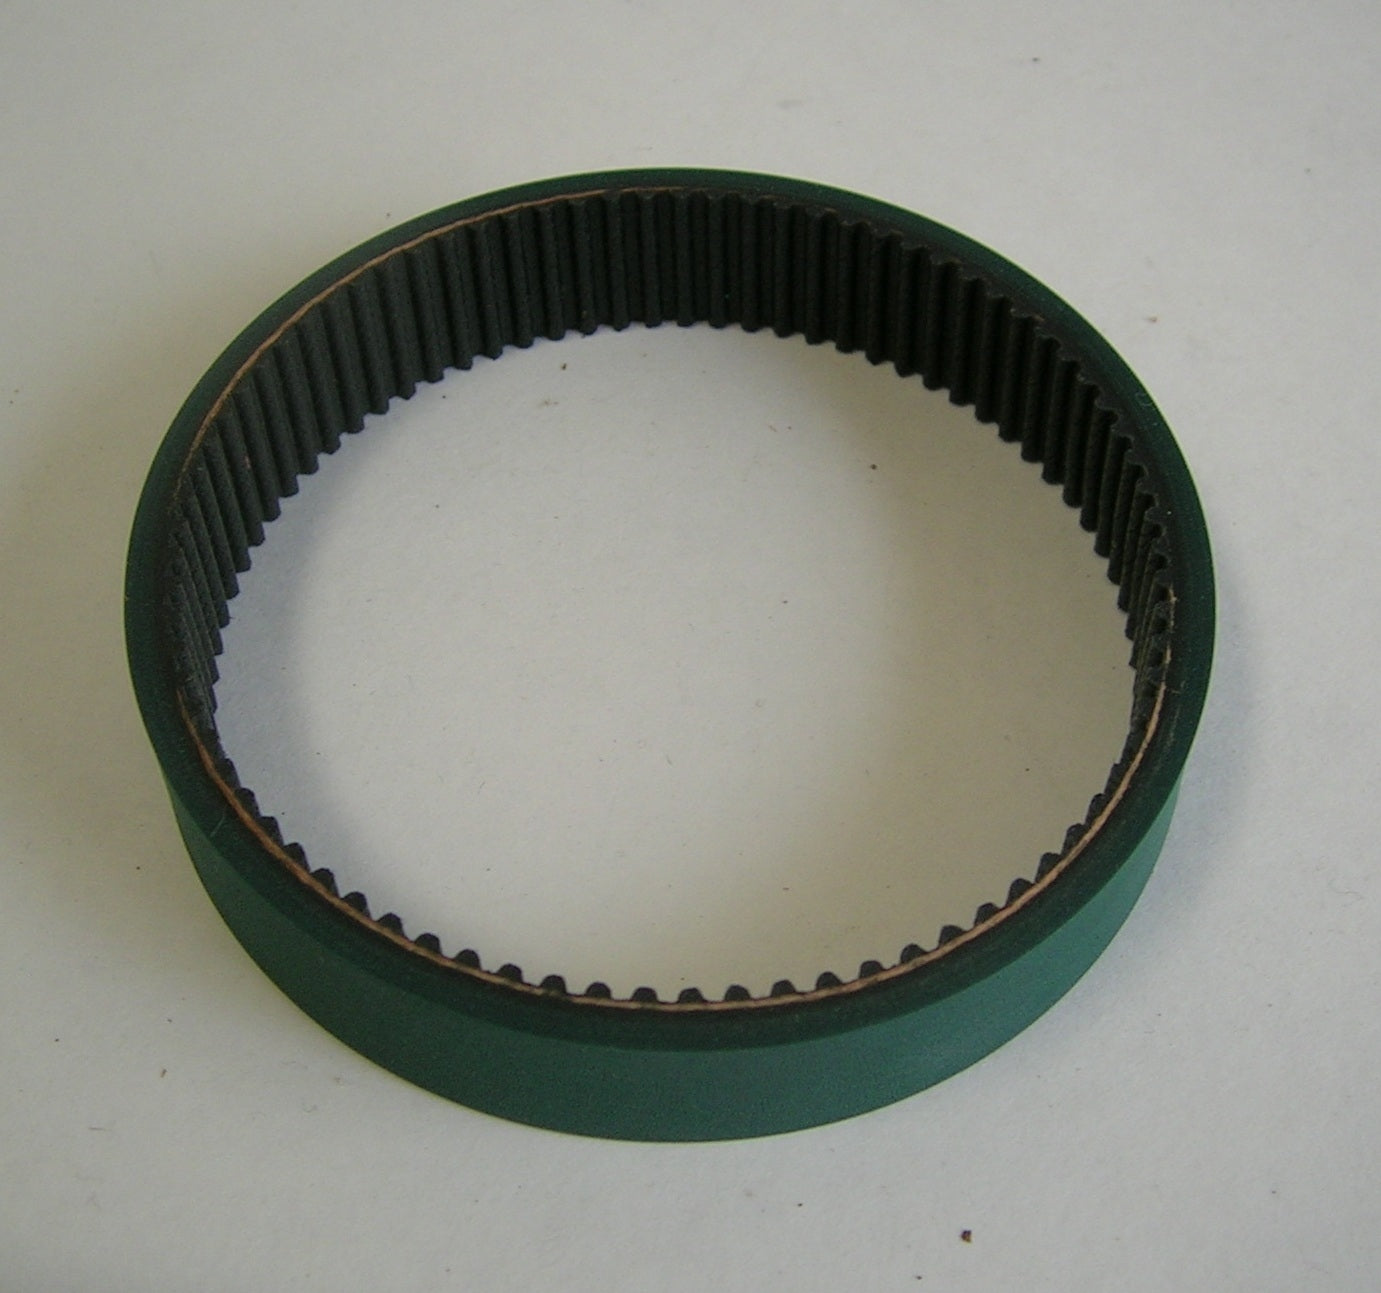 Spectrum Technologies Toothed Replacement Grabber Feed Belt 54 Tooth Green